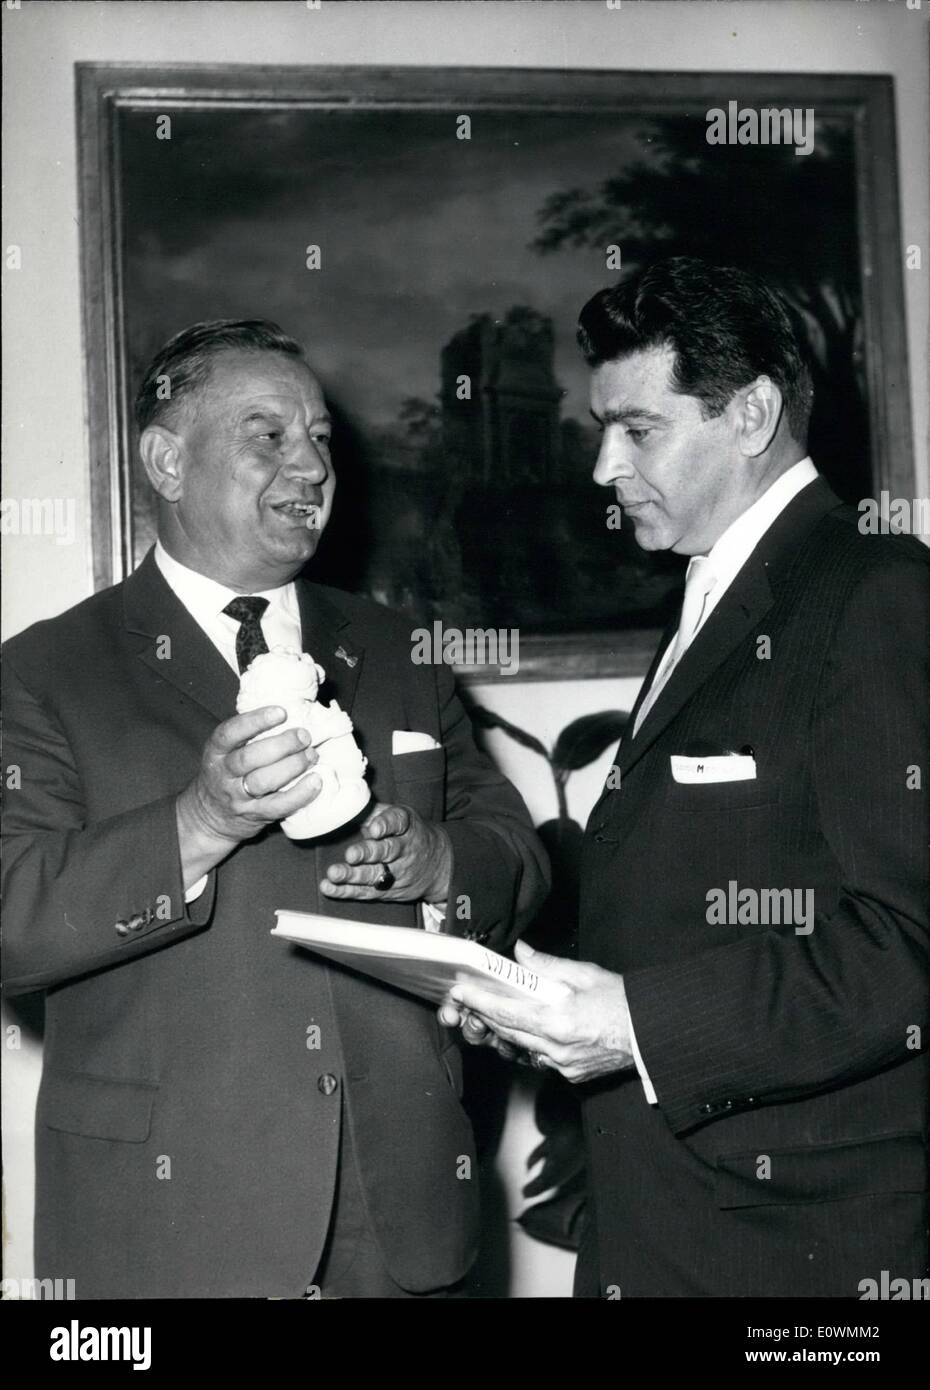 Sep. 09, 1963 - For the First time at Bavaria: Is at the moment the President of ''Communicated Bavarians of great New York'', Herbert Marsel. He was welcomed today by Minister president Alfons Goppel. Herbert Marsel, the Parents of whom are Born at Bavaria, looks very pleased to his first visit of Munich's Oktoberfest. although Mr. Marsel has never before been in Southern Germany, he is able to do the traditions Bavarian Dance, the ''Schuhplattler''. Picture Shows: Minister president Alfons Goppel (left) and Mr. Herbert Marsel. Stock Photo